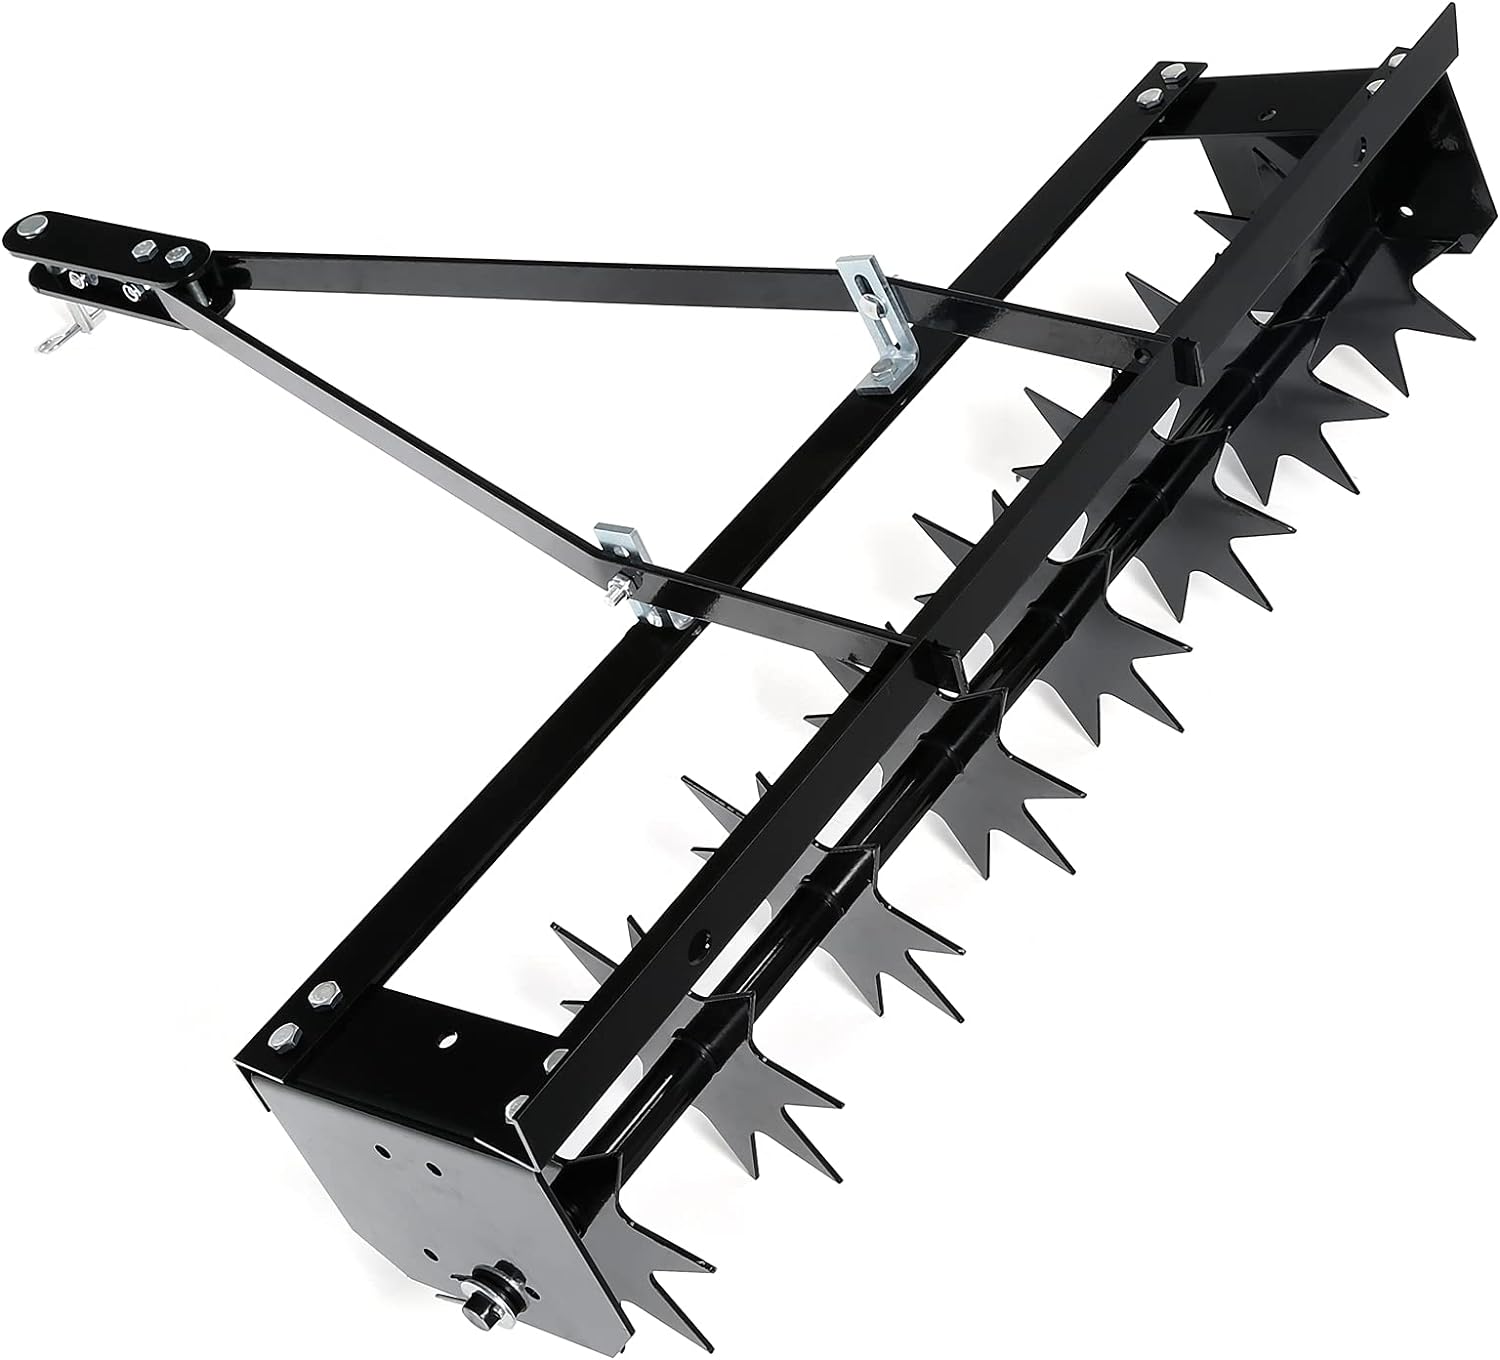 Tengchang 32" Tow Behind Lawn Aerator Soil Penetrator Spikes Tractor Soil Mower Hitch